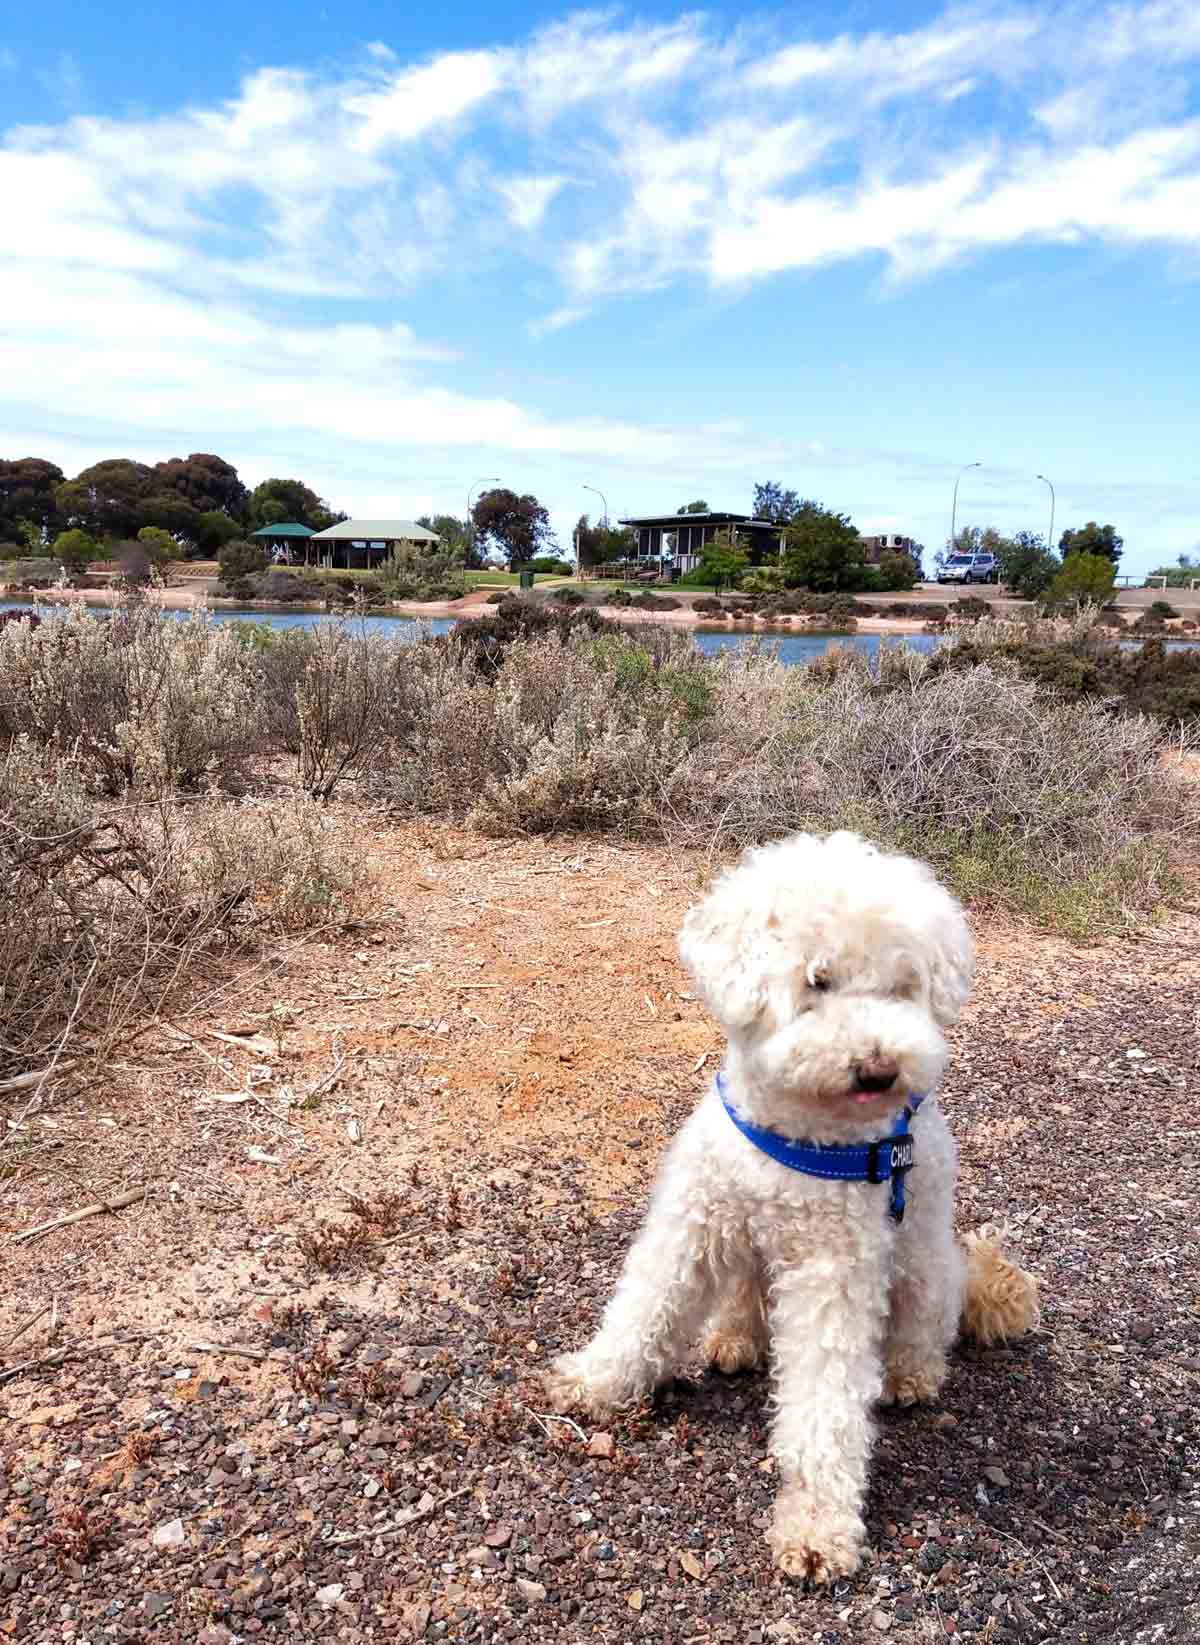 Charlie at Whyalla Wetlands in the Eyre Peninsula, South Australia. Sumthin' Tastee Cafe in the background